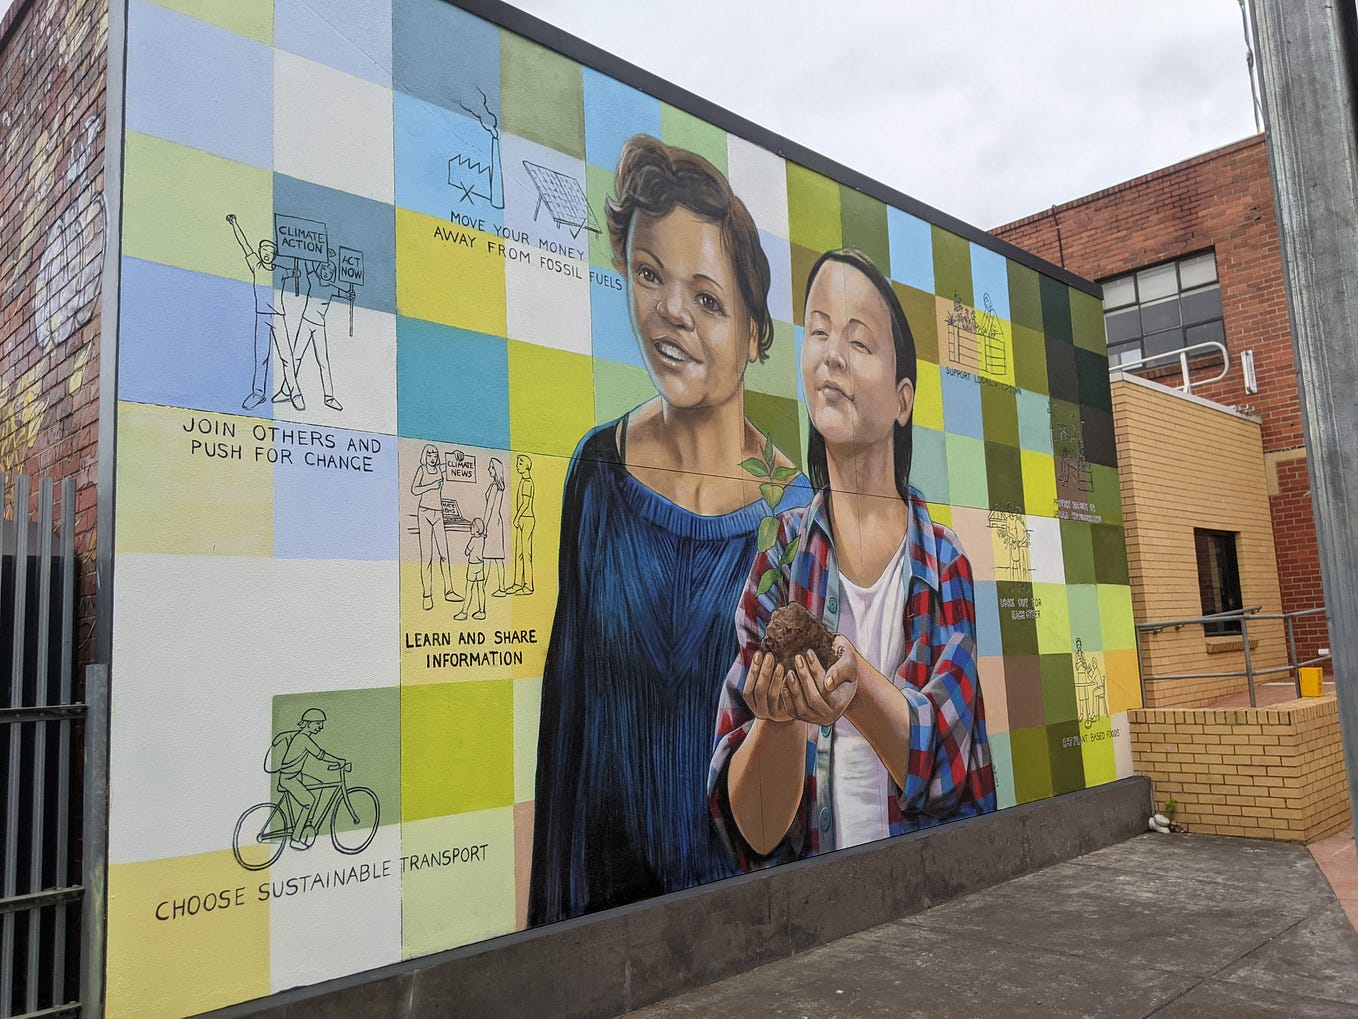 the mural reads “move your money away from fossil fuels”, “join others and push for change”, “learn and share information”, “choose sustainable transport”, “support locally grown produce”, “look out for each other”, “eat plant-based foods” and “protect nature in urban environments”